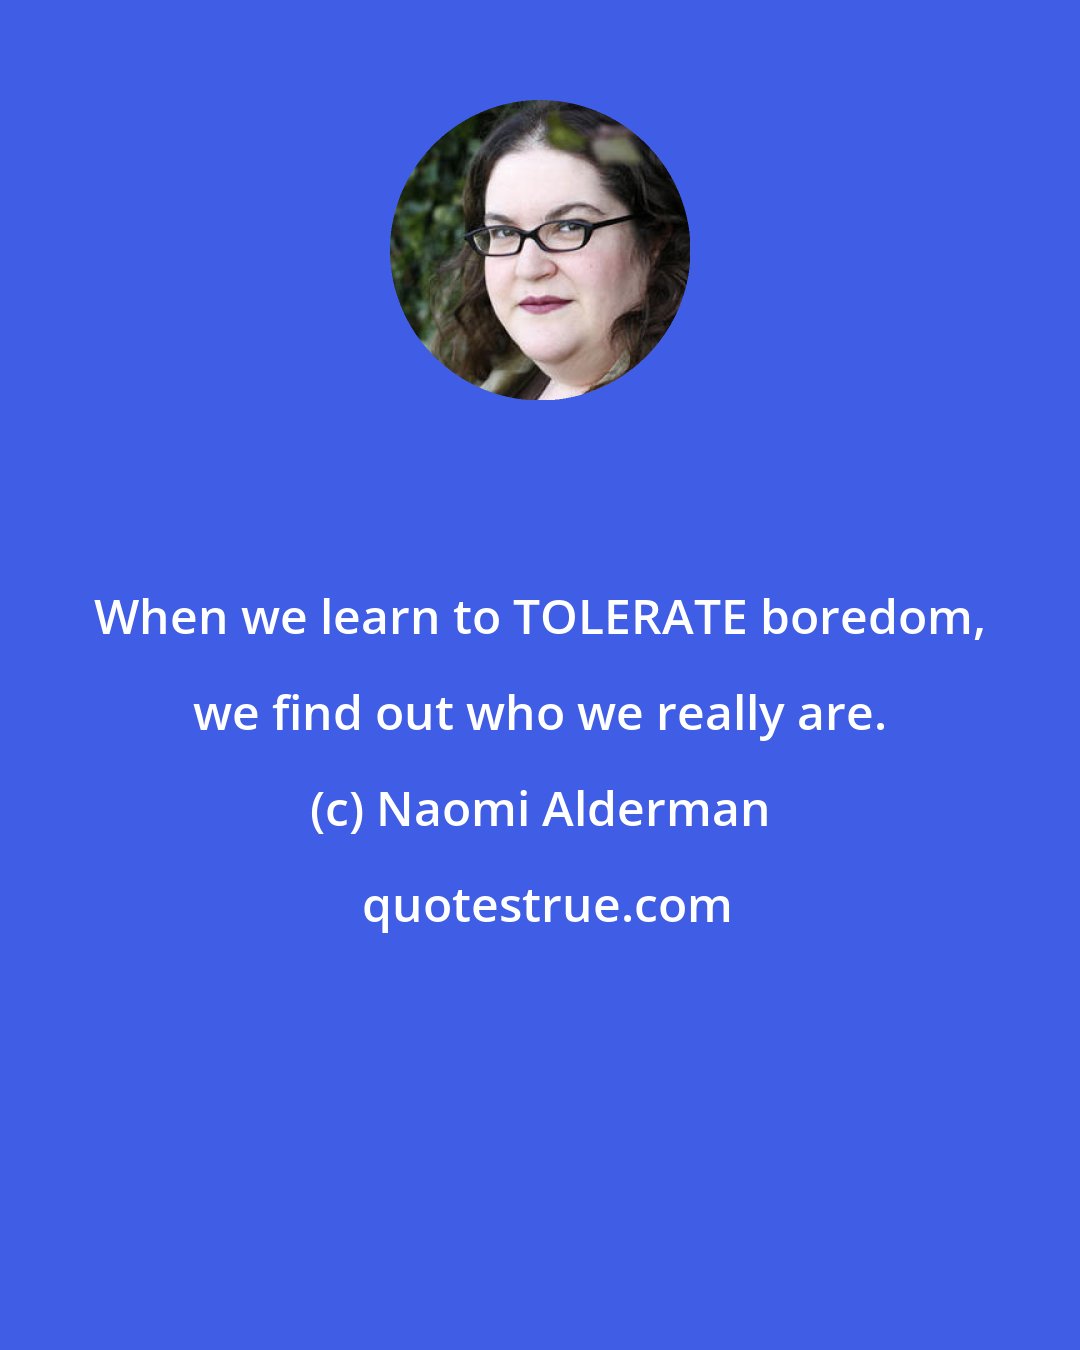 Naomi Alderman: When we learn to TOLERATE boredom, we find out who we really are.